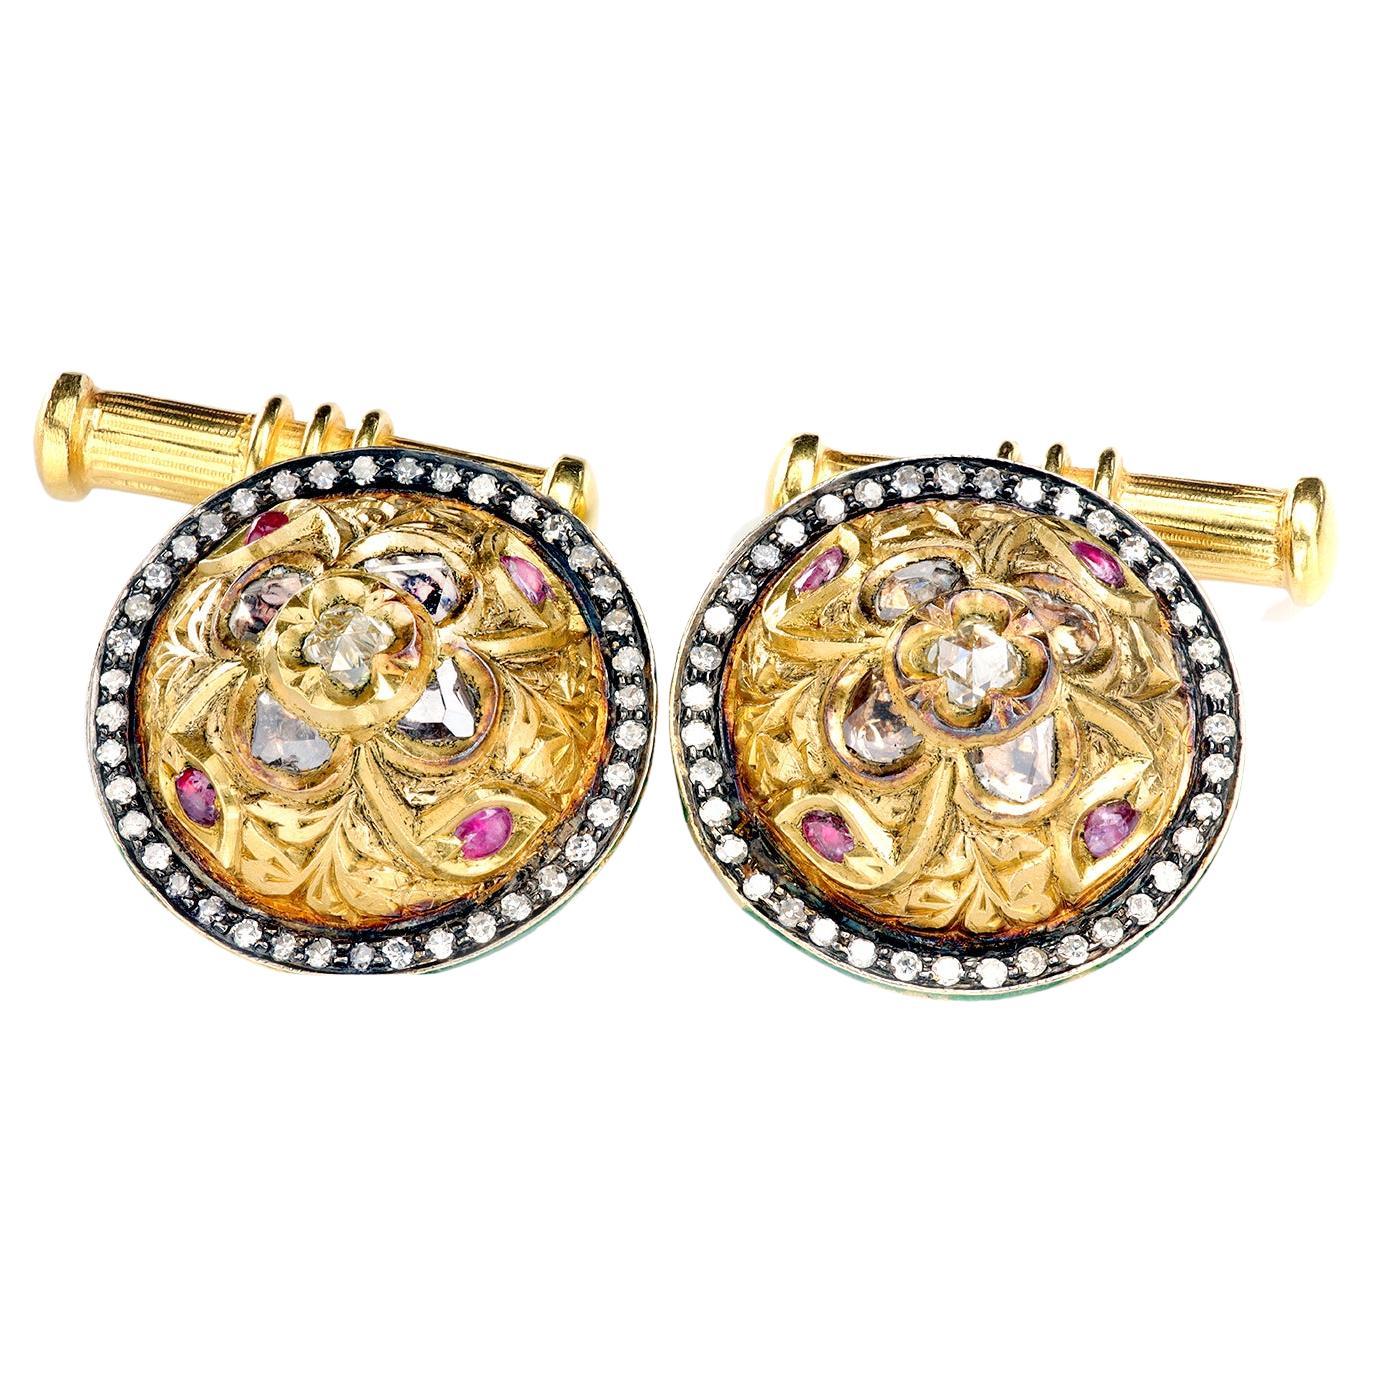 Antique Unisex 24k Gold "Kundan" Cufflinks with Natural Diamonds and Rubies For Sale